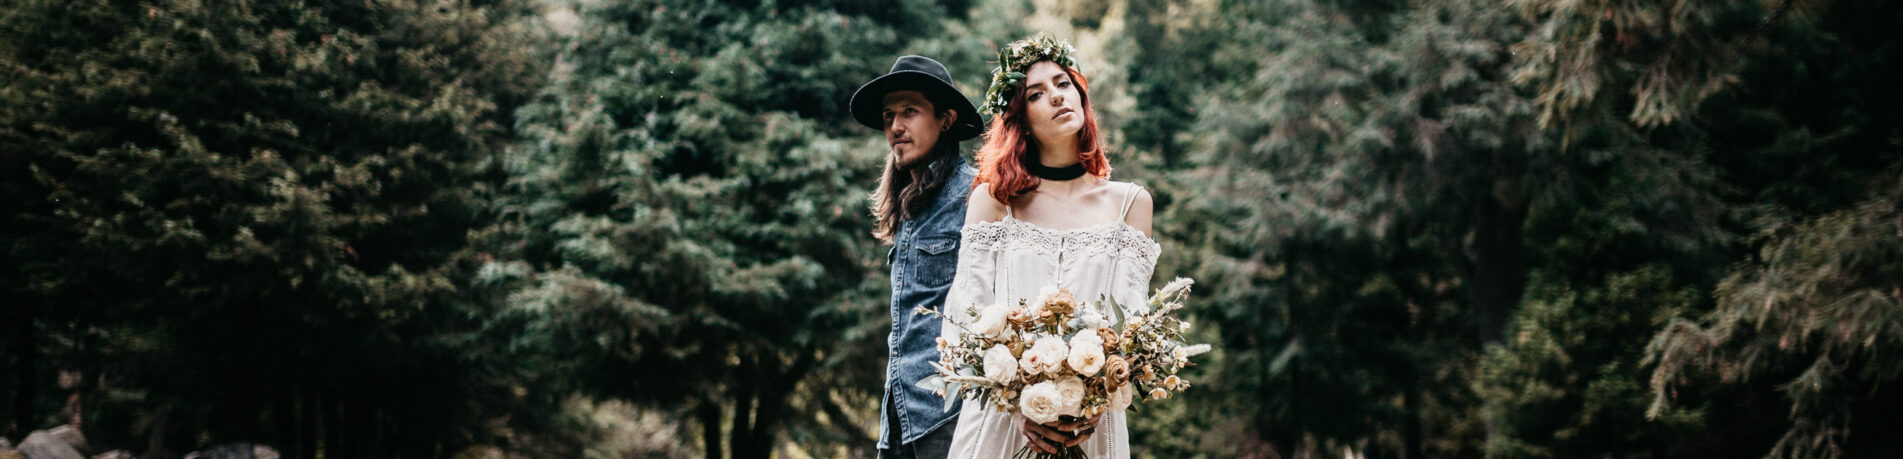 hipster-bride-and-groom